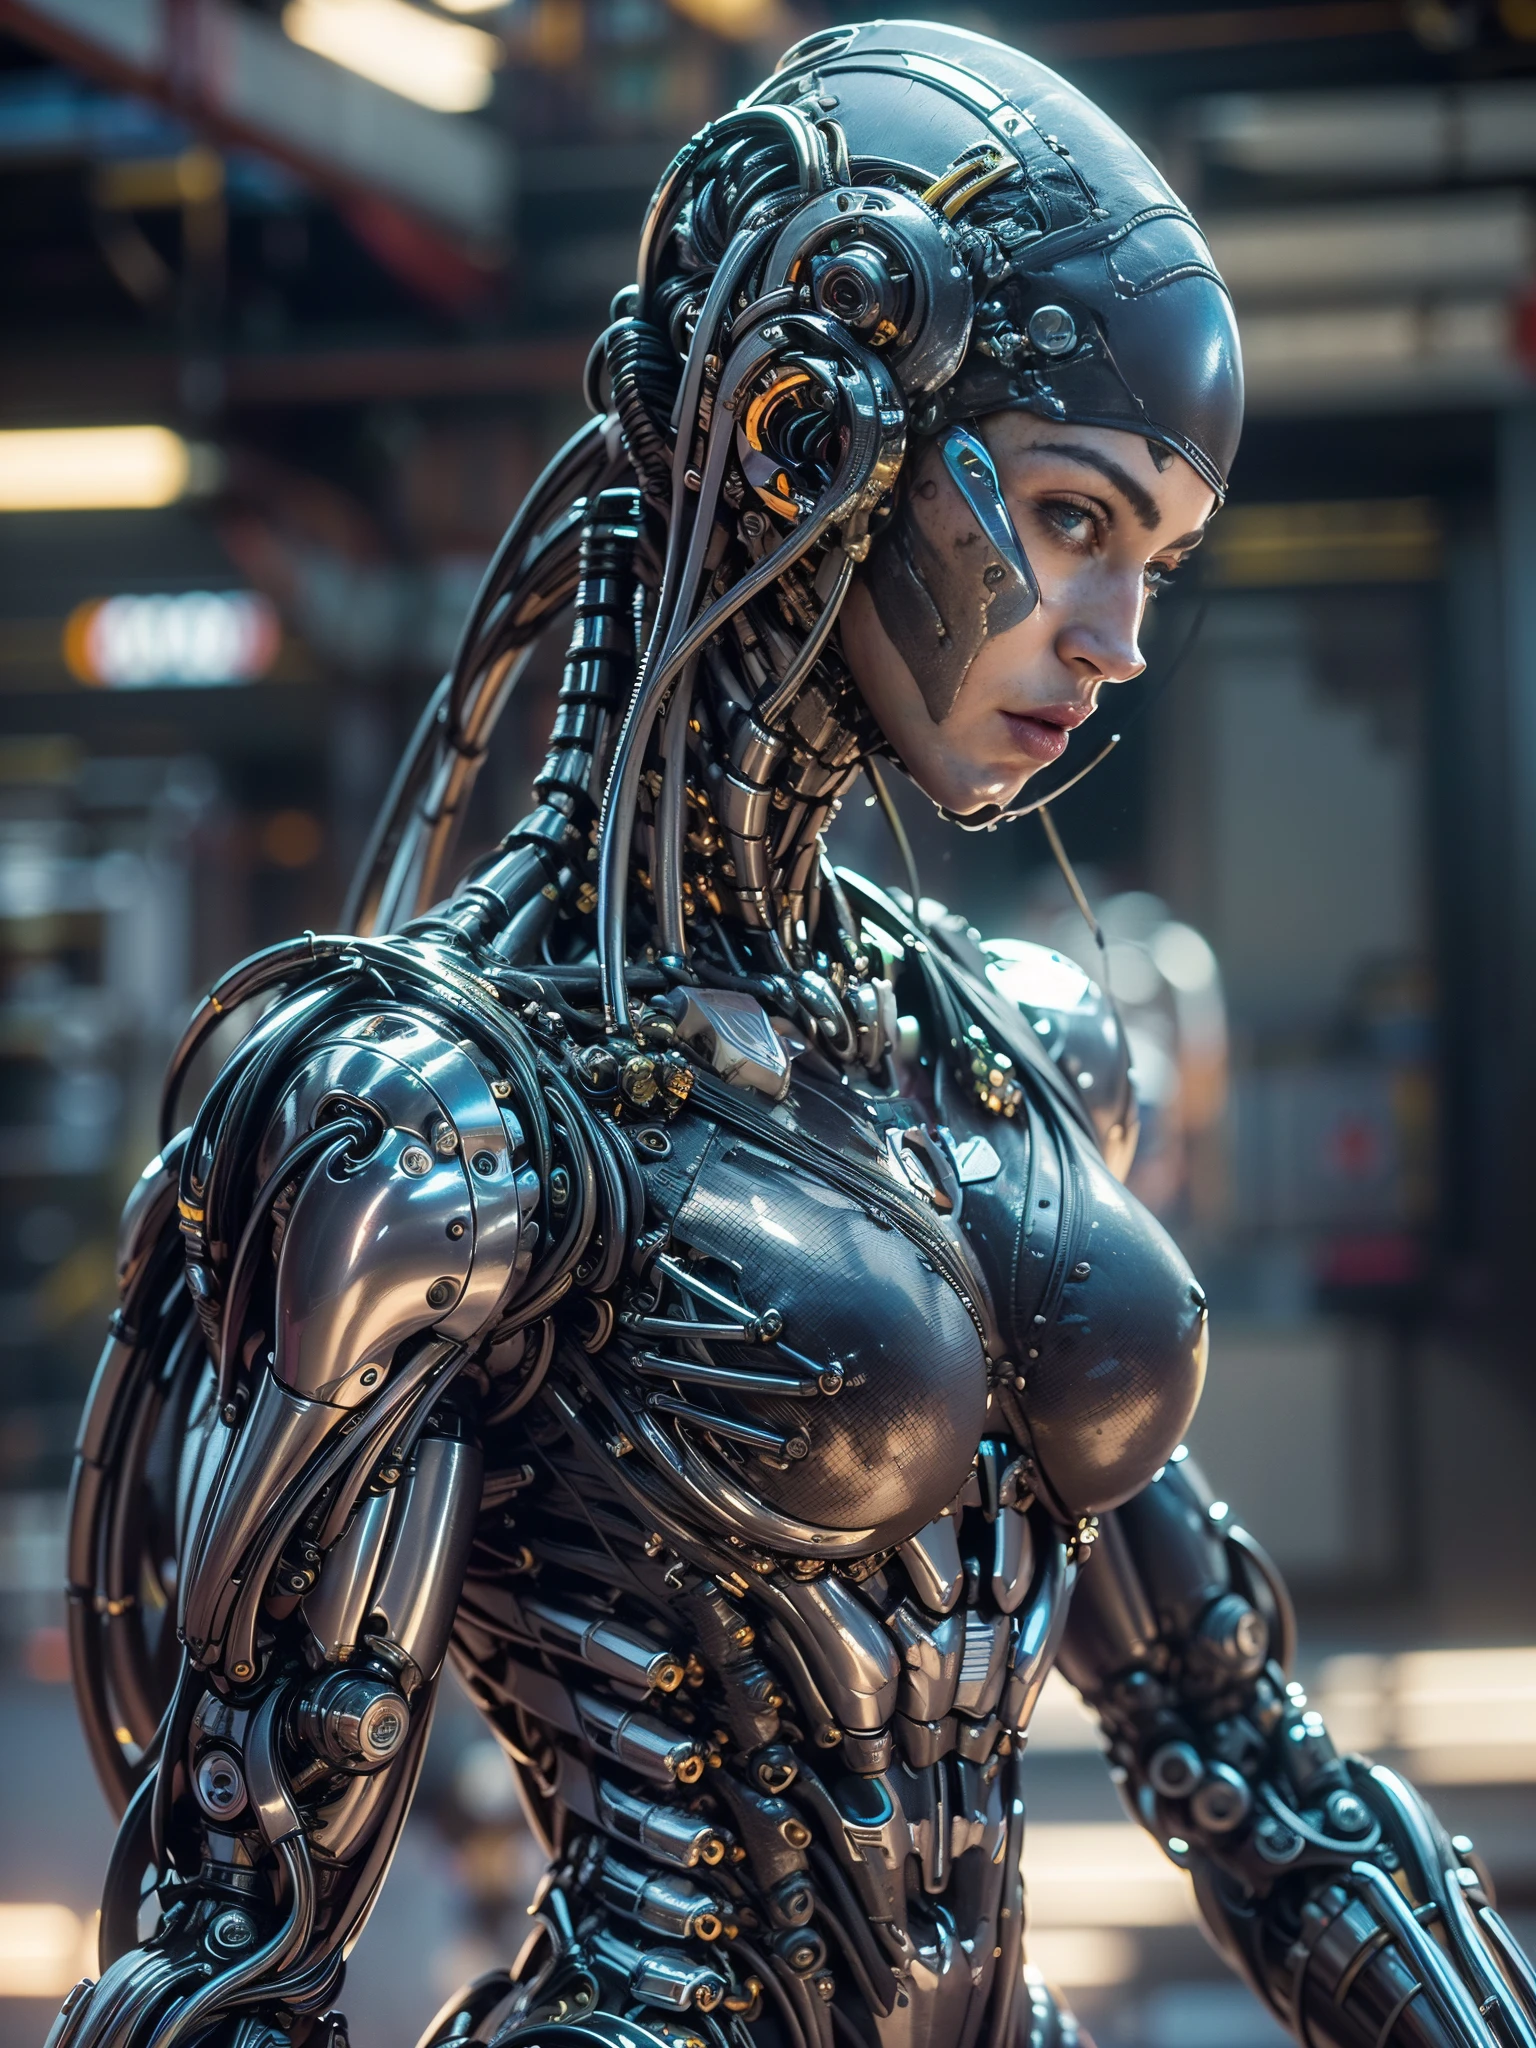 (beautiful muscular female cyborg:1.25), (megan-fox:1.5), (full body pose), (metallic muscular armor:1.5), (no hair), (bald head covered in cables:1.5), (robotic mechanical physique:1.5), (super muscular female cyborg:1.5), (covered in cables and mechanical muscles:1.5), (android muscular anatomy:1.5), (perfect fingers:1.25),(8k, RAW photo, photorealistic:1.25), sci fi atmosphere, futuristic dystopia, alien landscape,